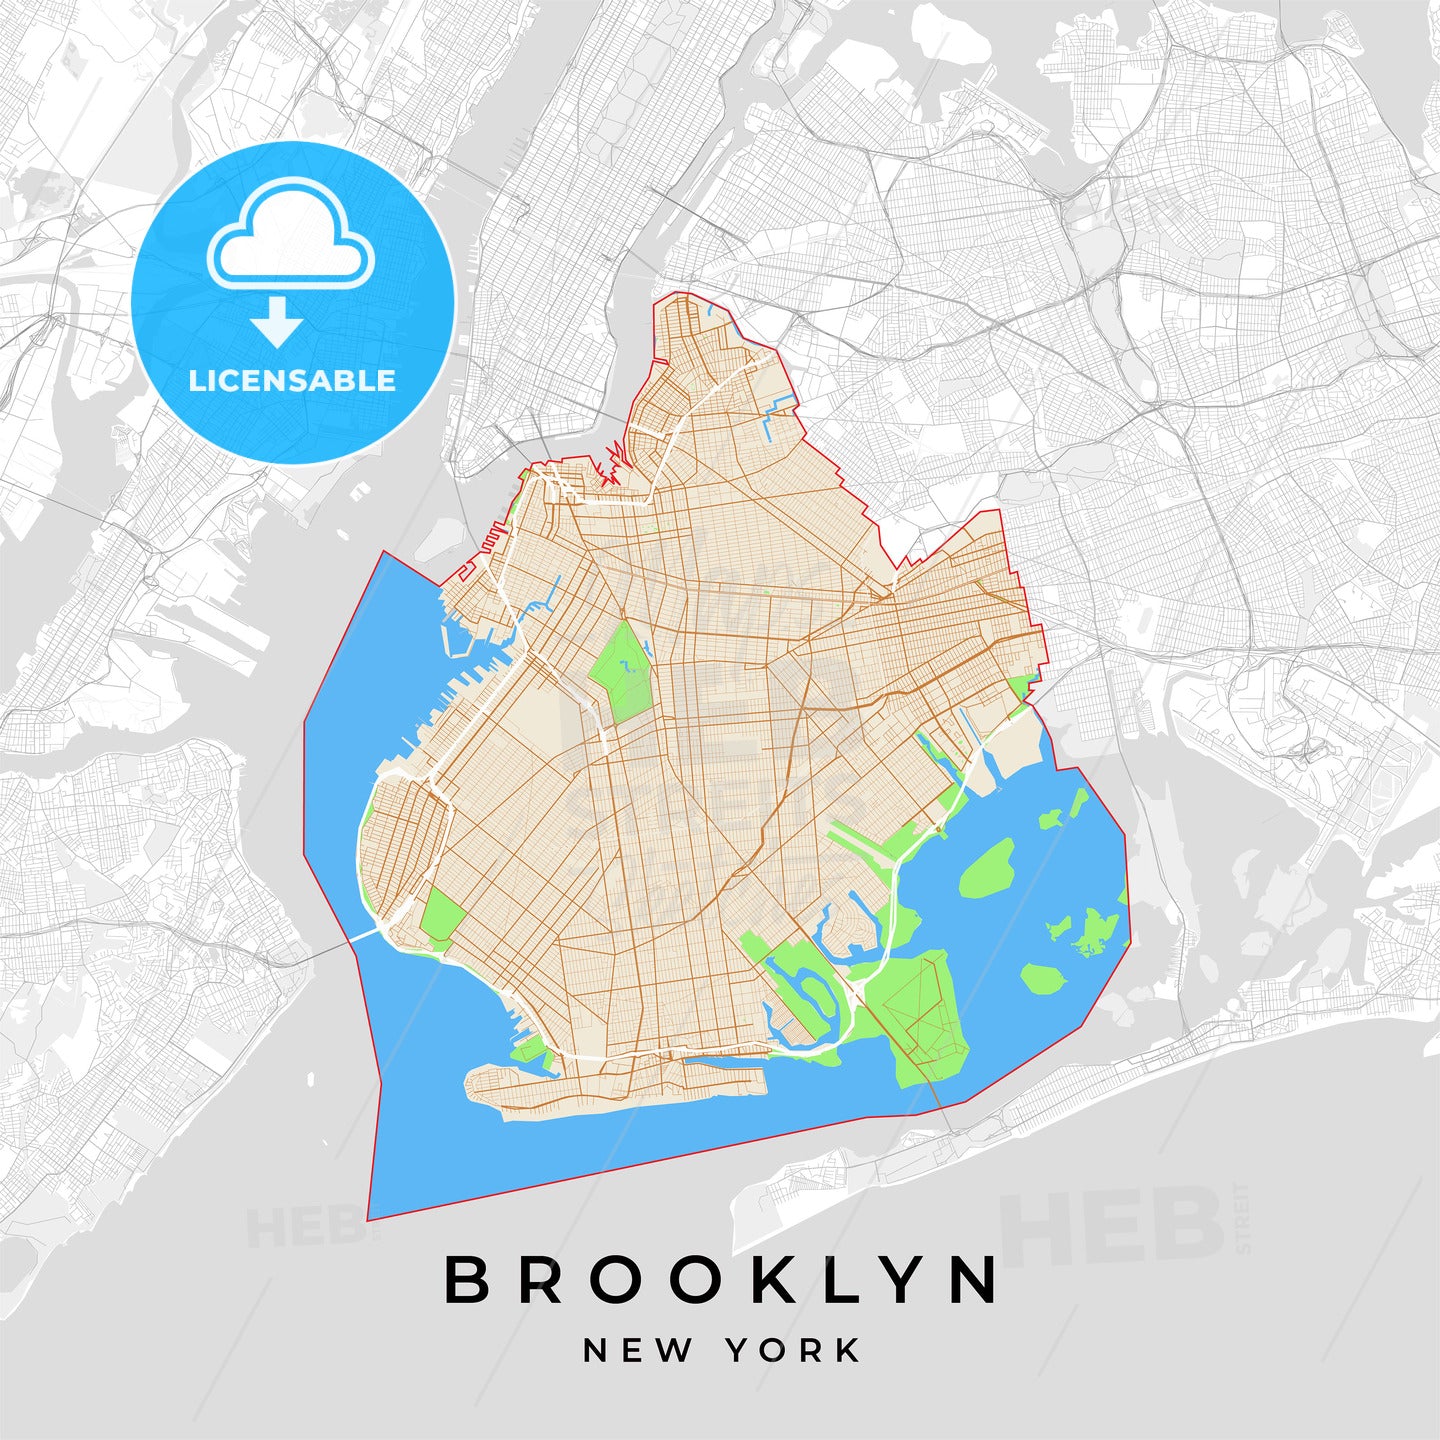 Vector map of Brooklyn, New York, USA - HEBSTREITS